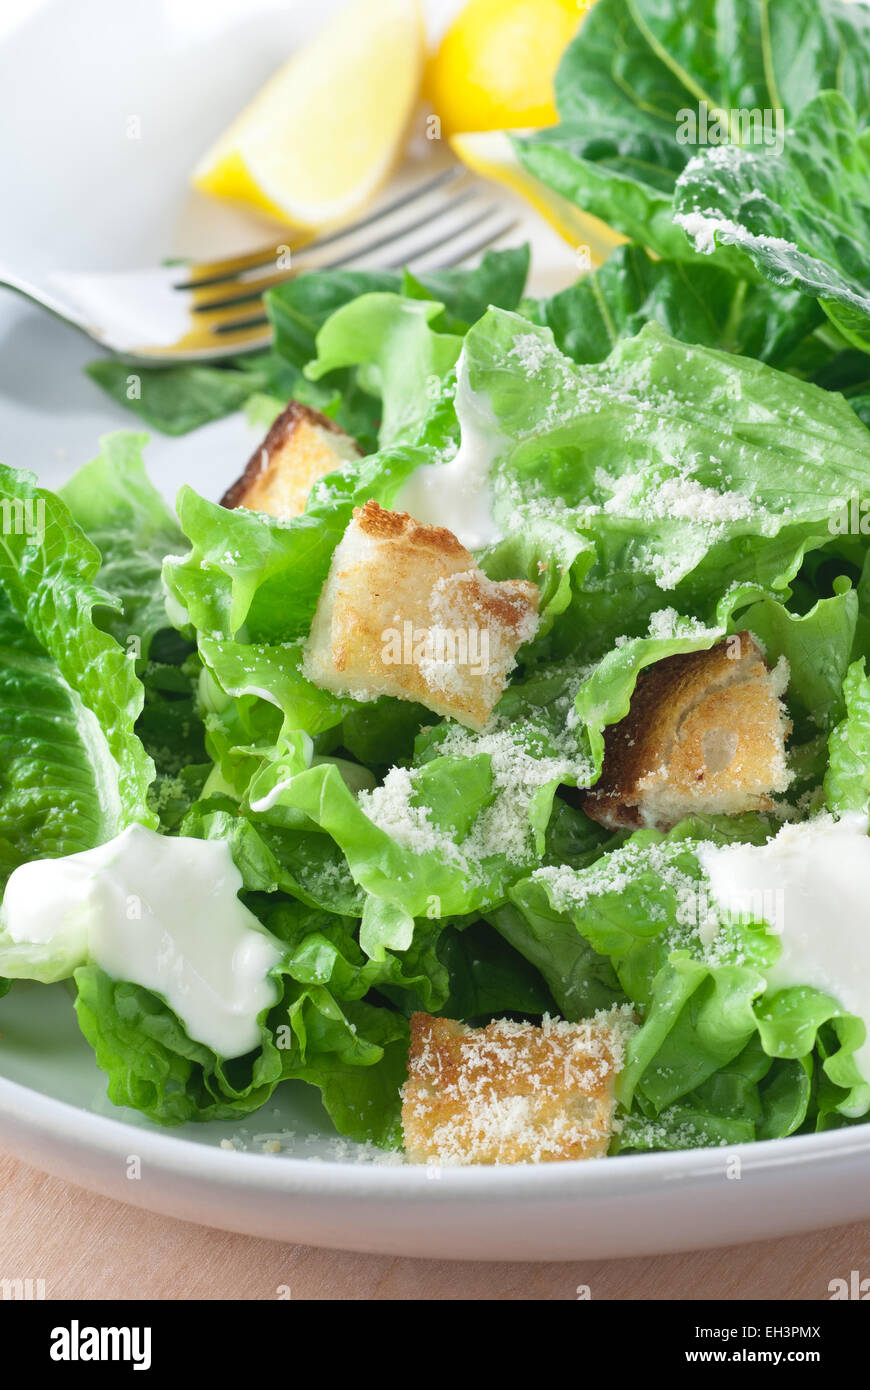 Caesar salad with grated parmesan, croutons and dressing. Stock Photo